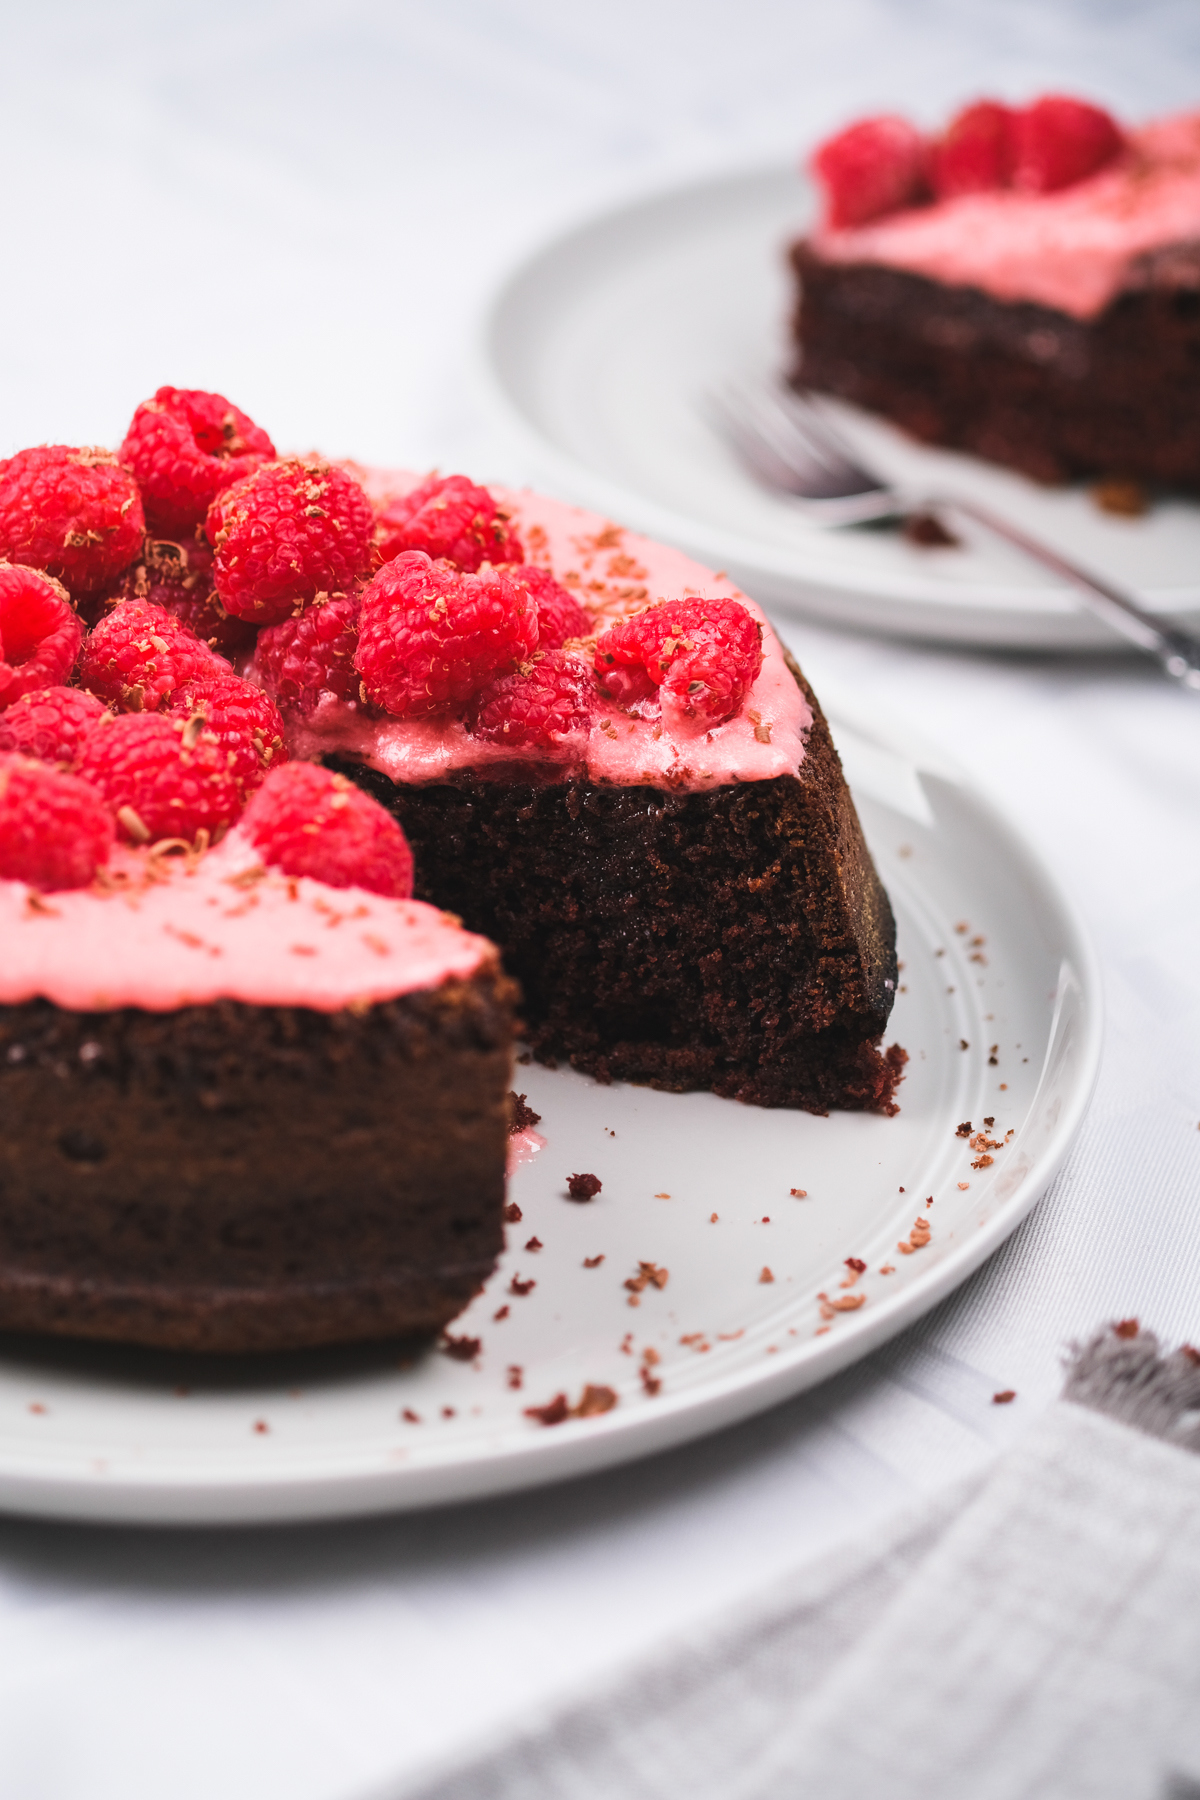 slicing up a chocolate raspberry cake with fresh berries and chocolate shavings